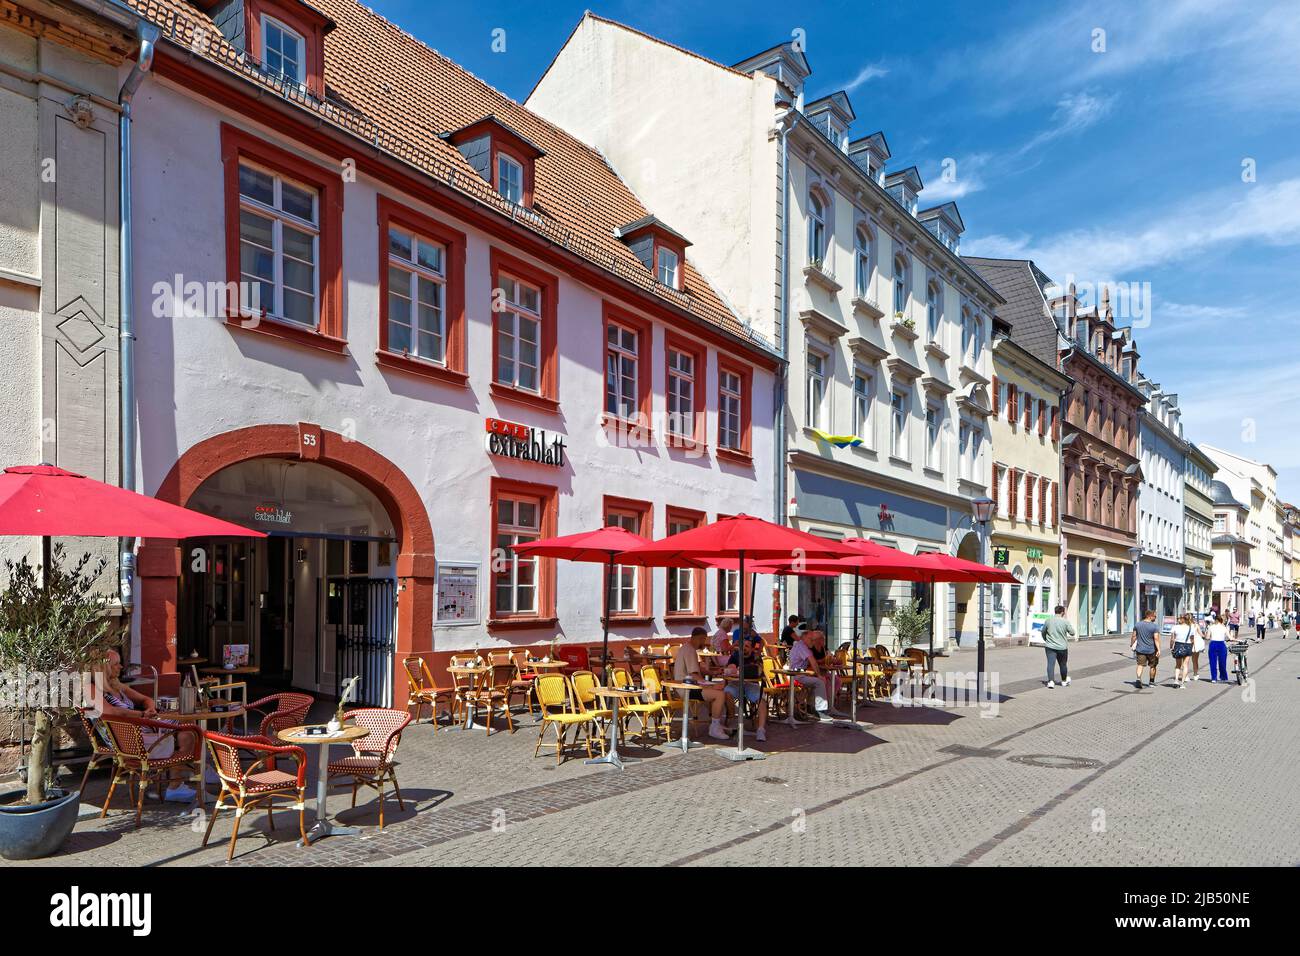 Typical, street scene, outdoor seating, parasol, Cafe extrablatt, shopping street, guests, passers-by, pedestrian zone, Hauptsrasse 53, Old Town Stock Photo